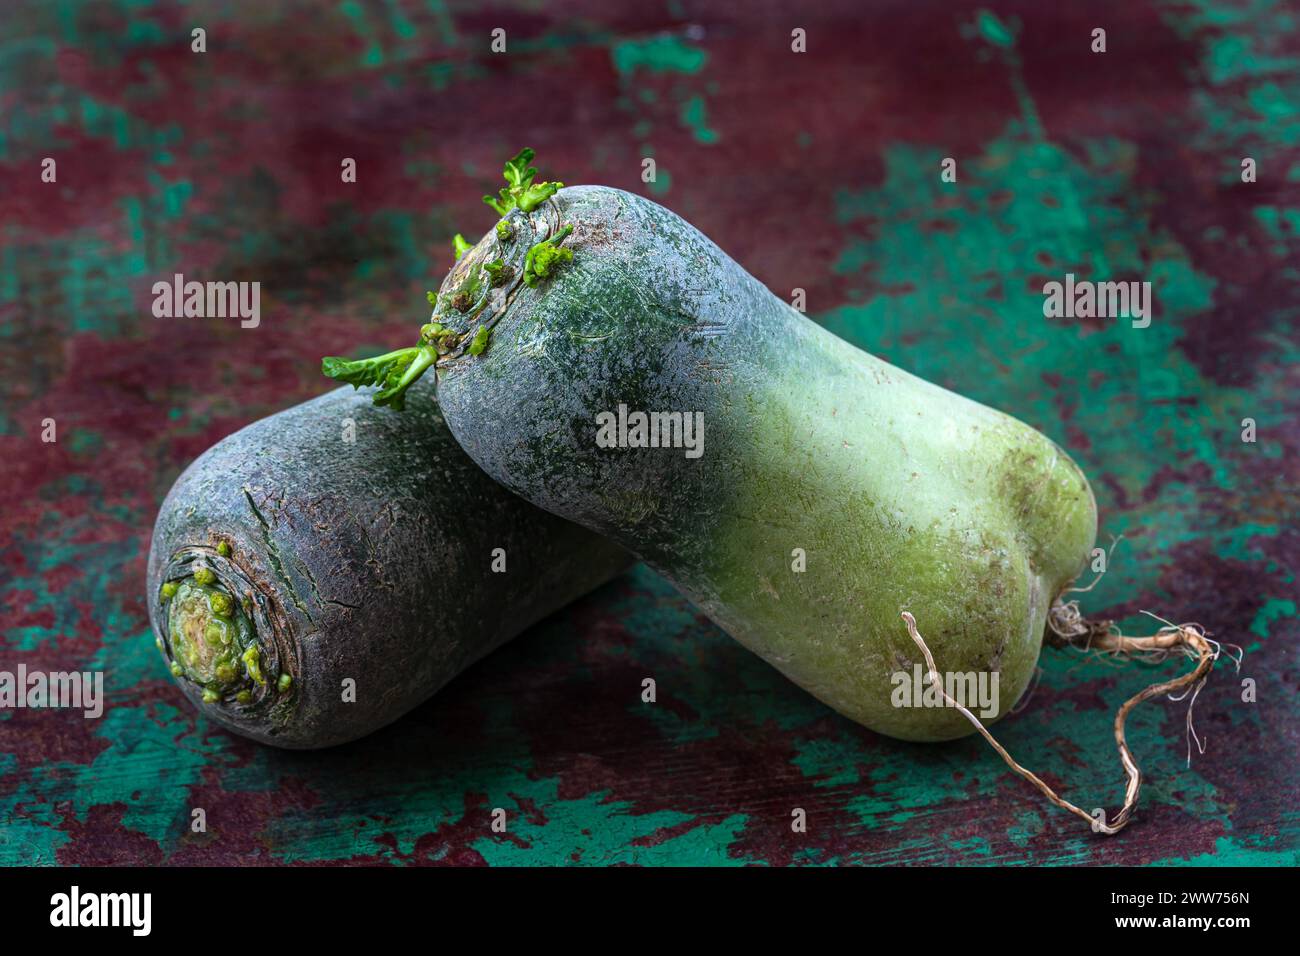 Two large vegetables on top of each other close-up on old green plank. Stock Photo